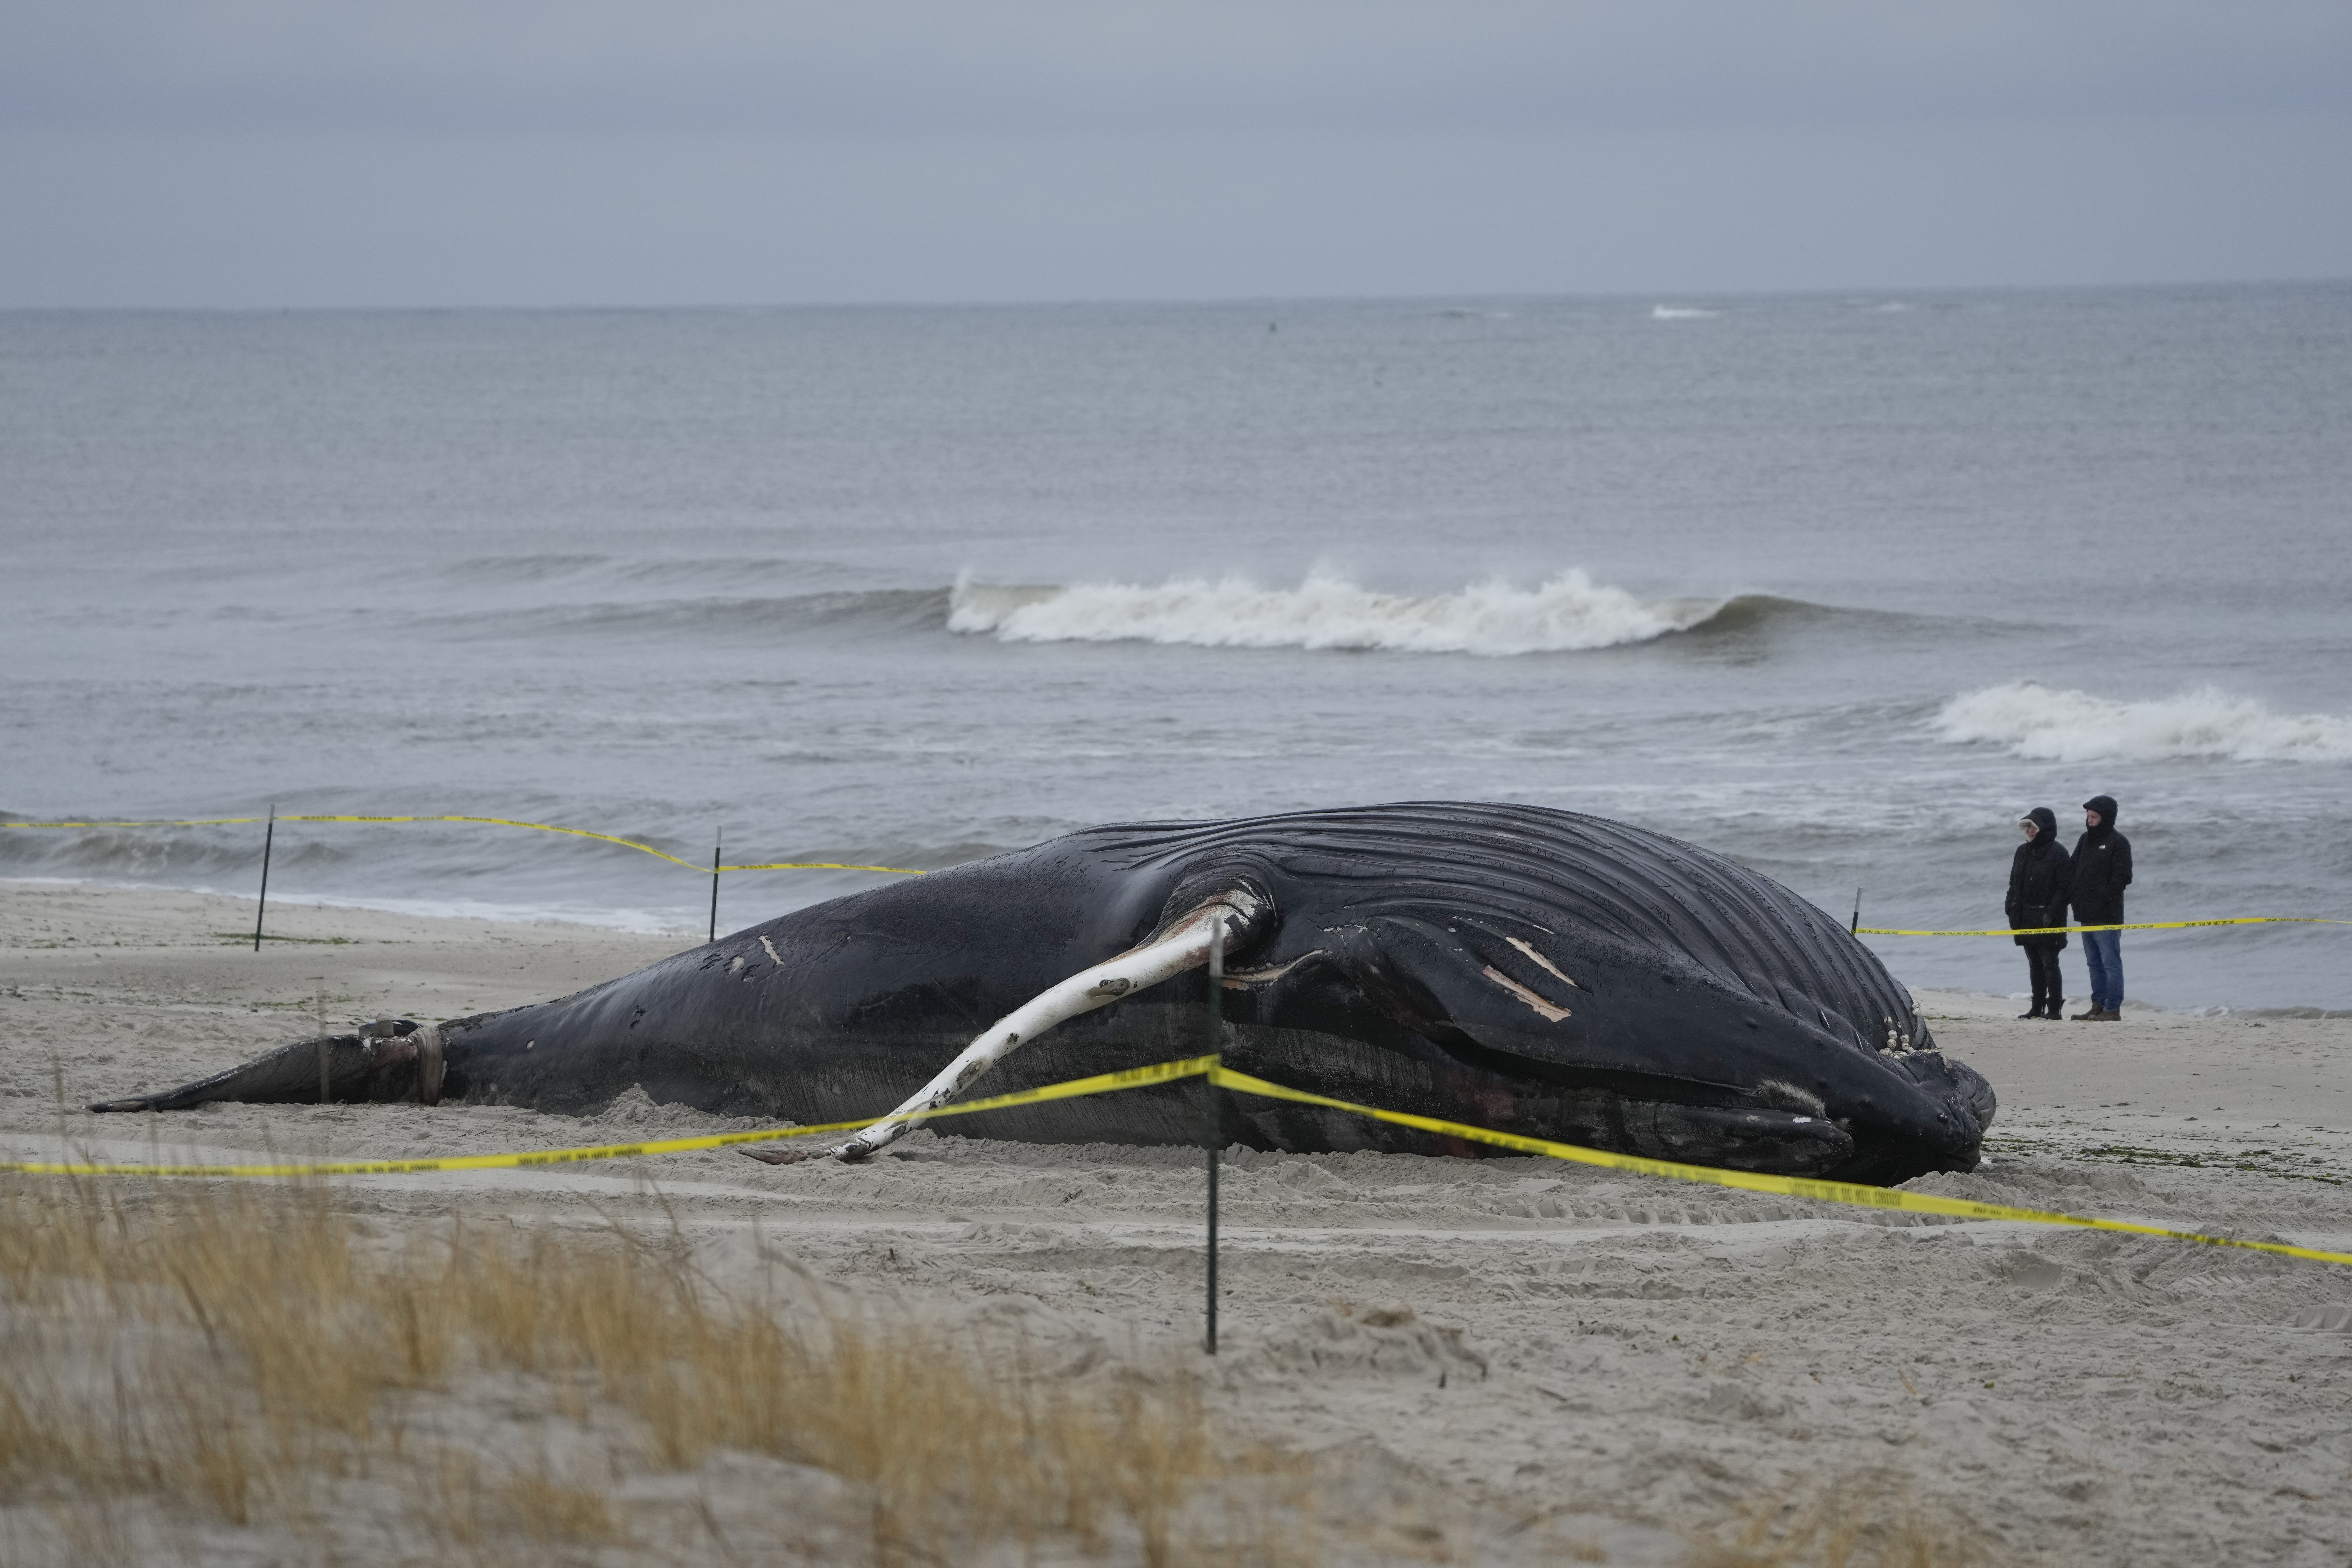 A dead whale washed ashore.